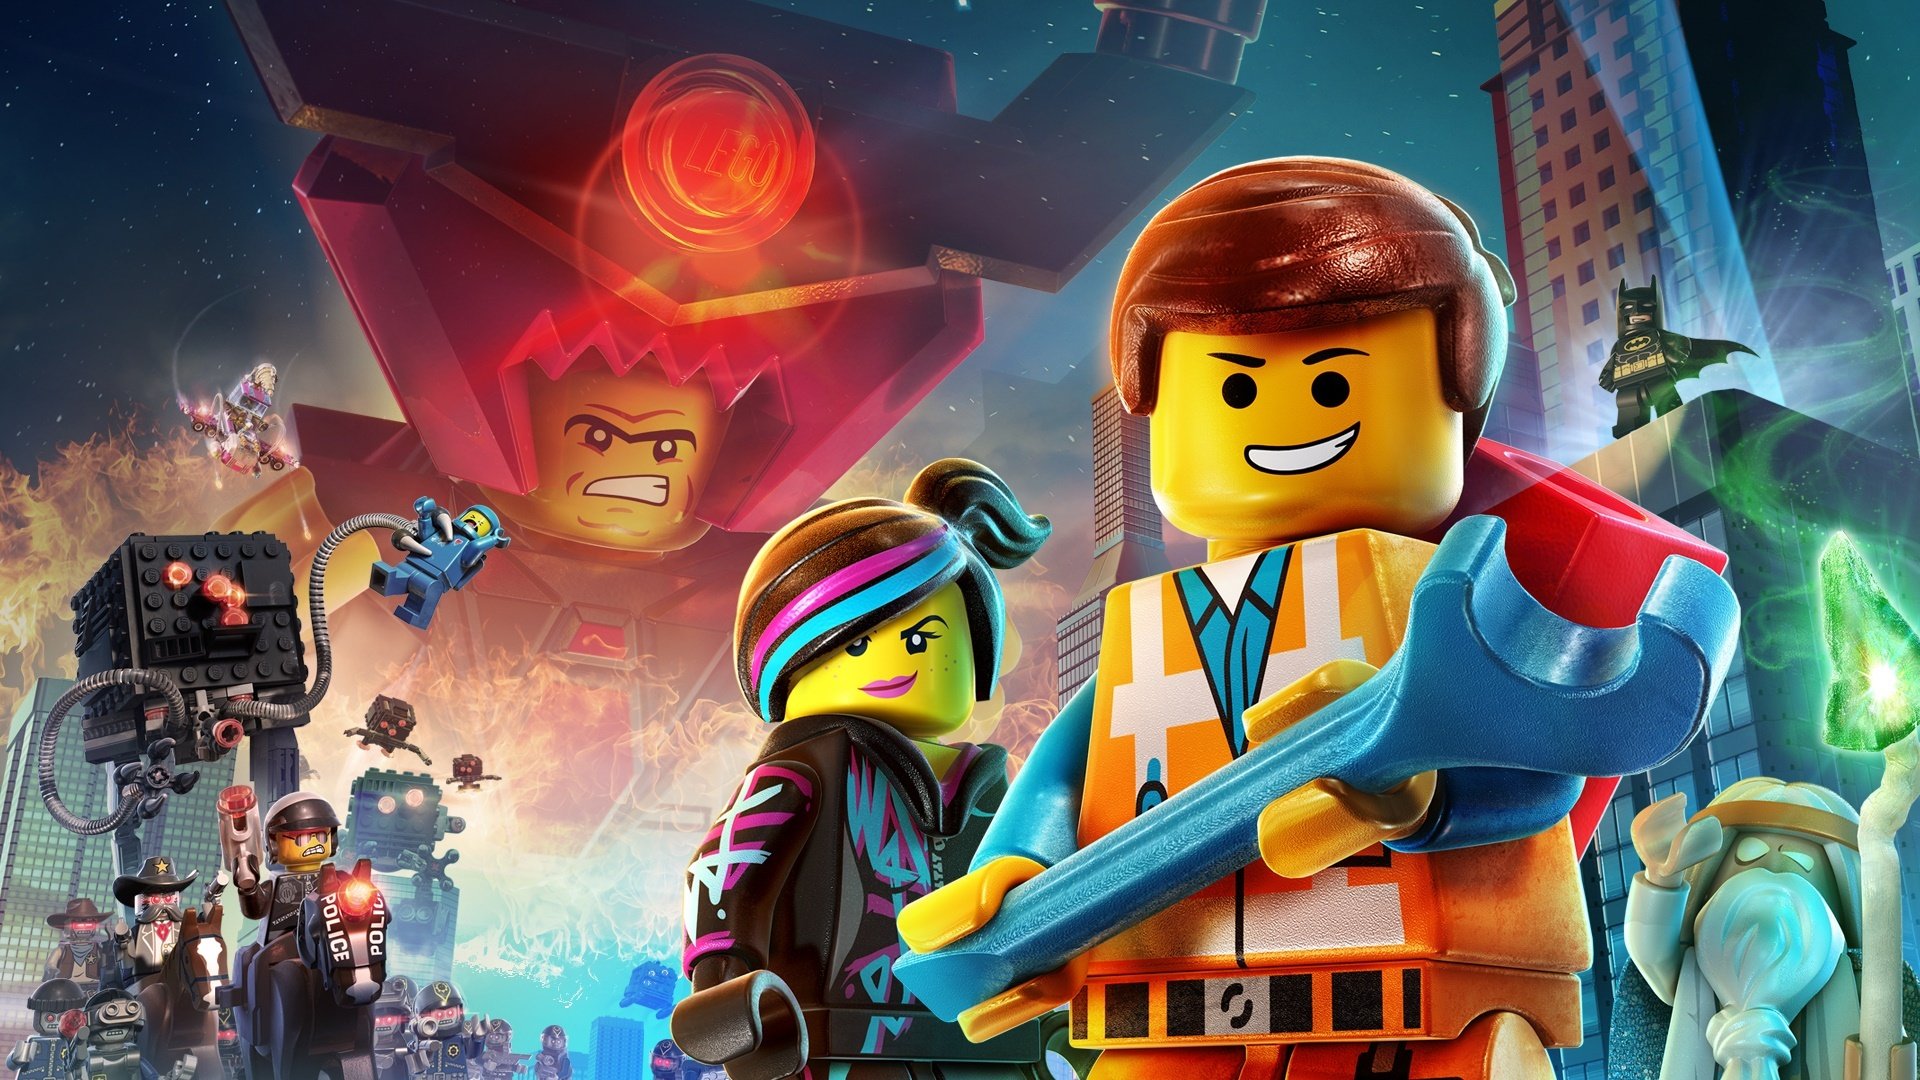  HD The Lego Movie Wallpapers amp Desktop Backgrounds 1920x1080